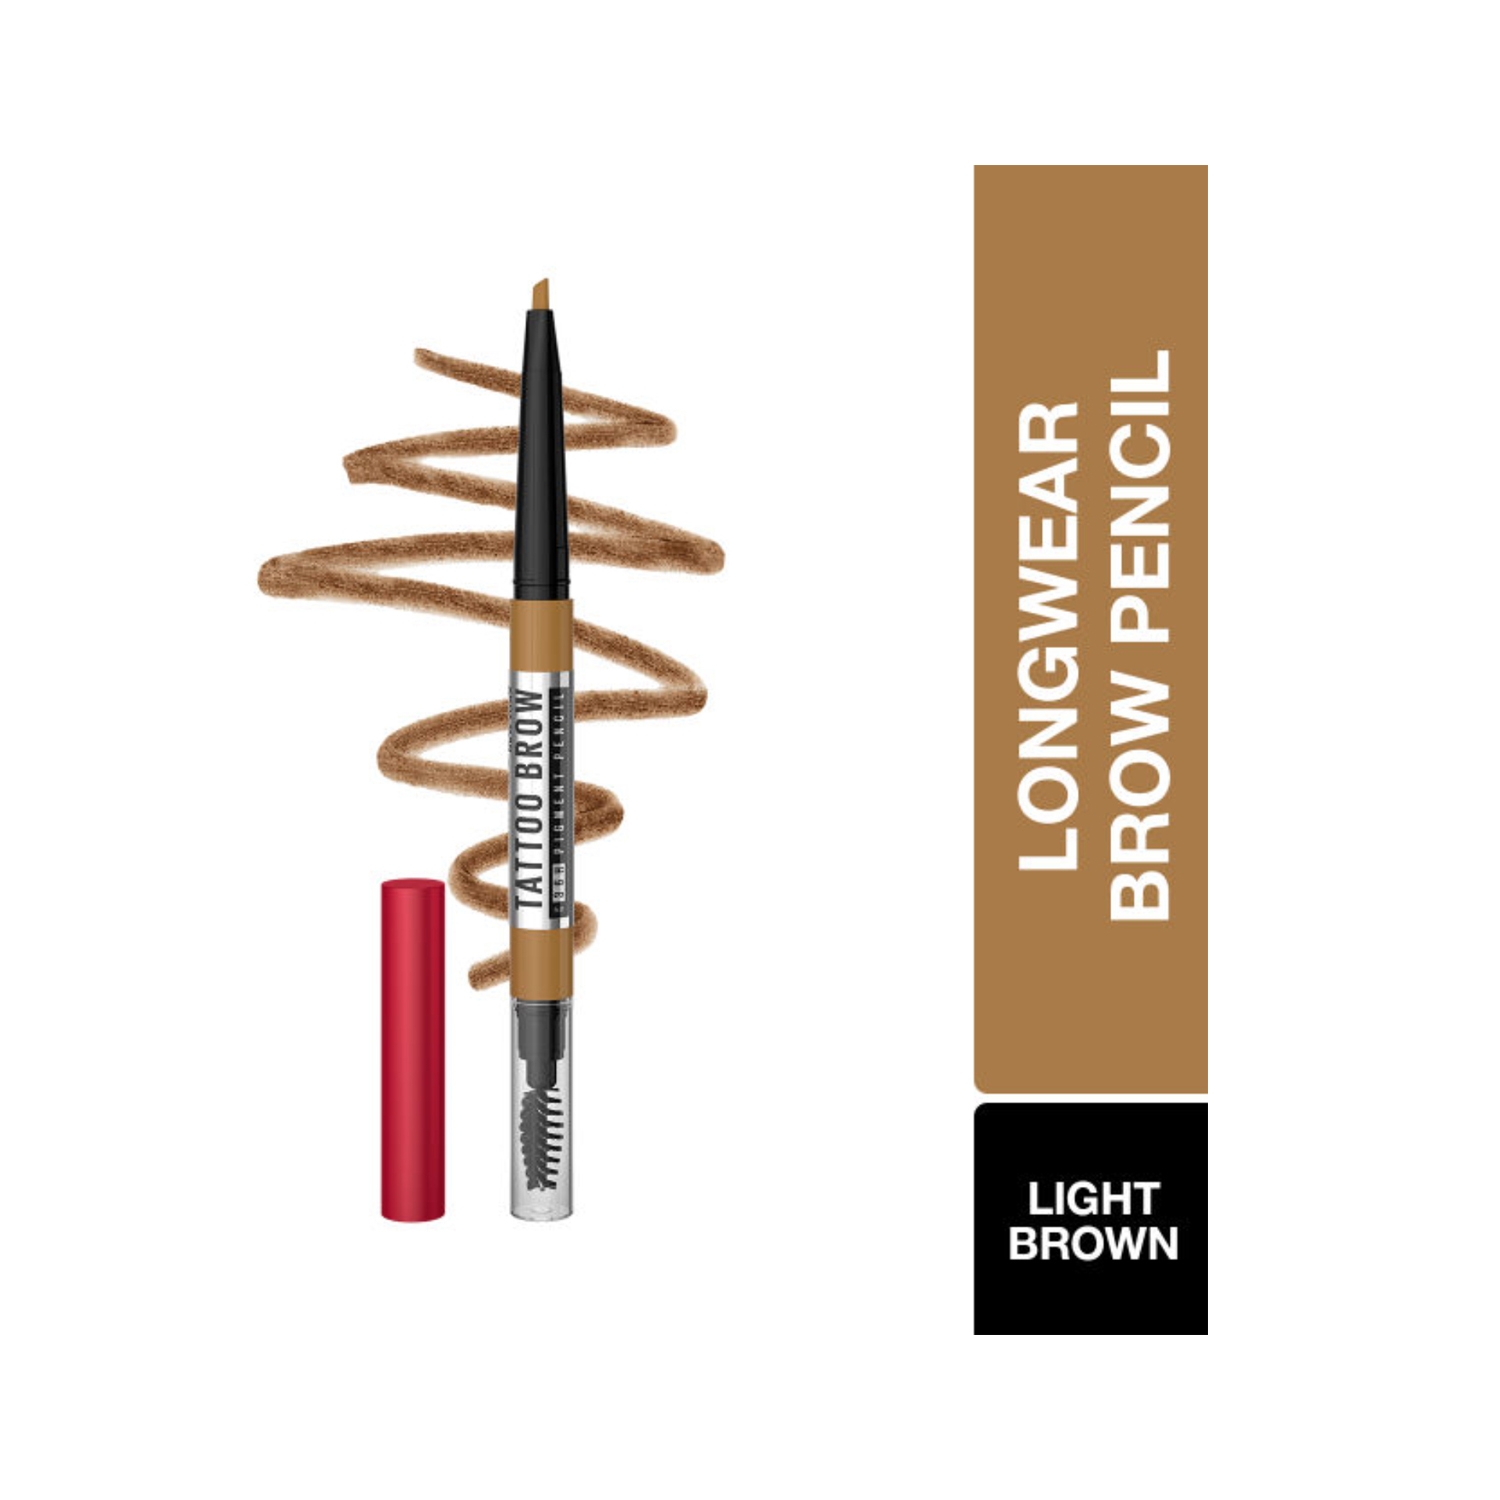 Maybelline New York | Maybelline New York 36H Brow Pencil - Light Brown (0.25g)